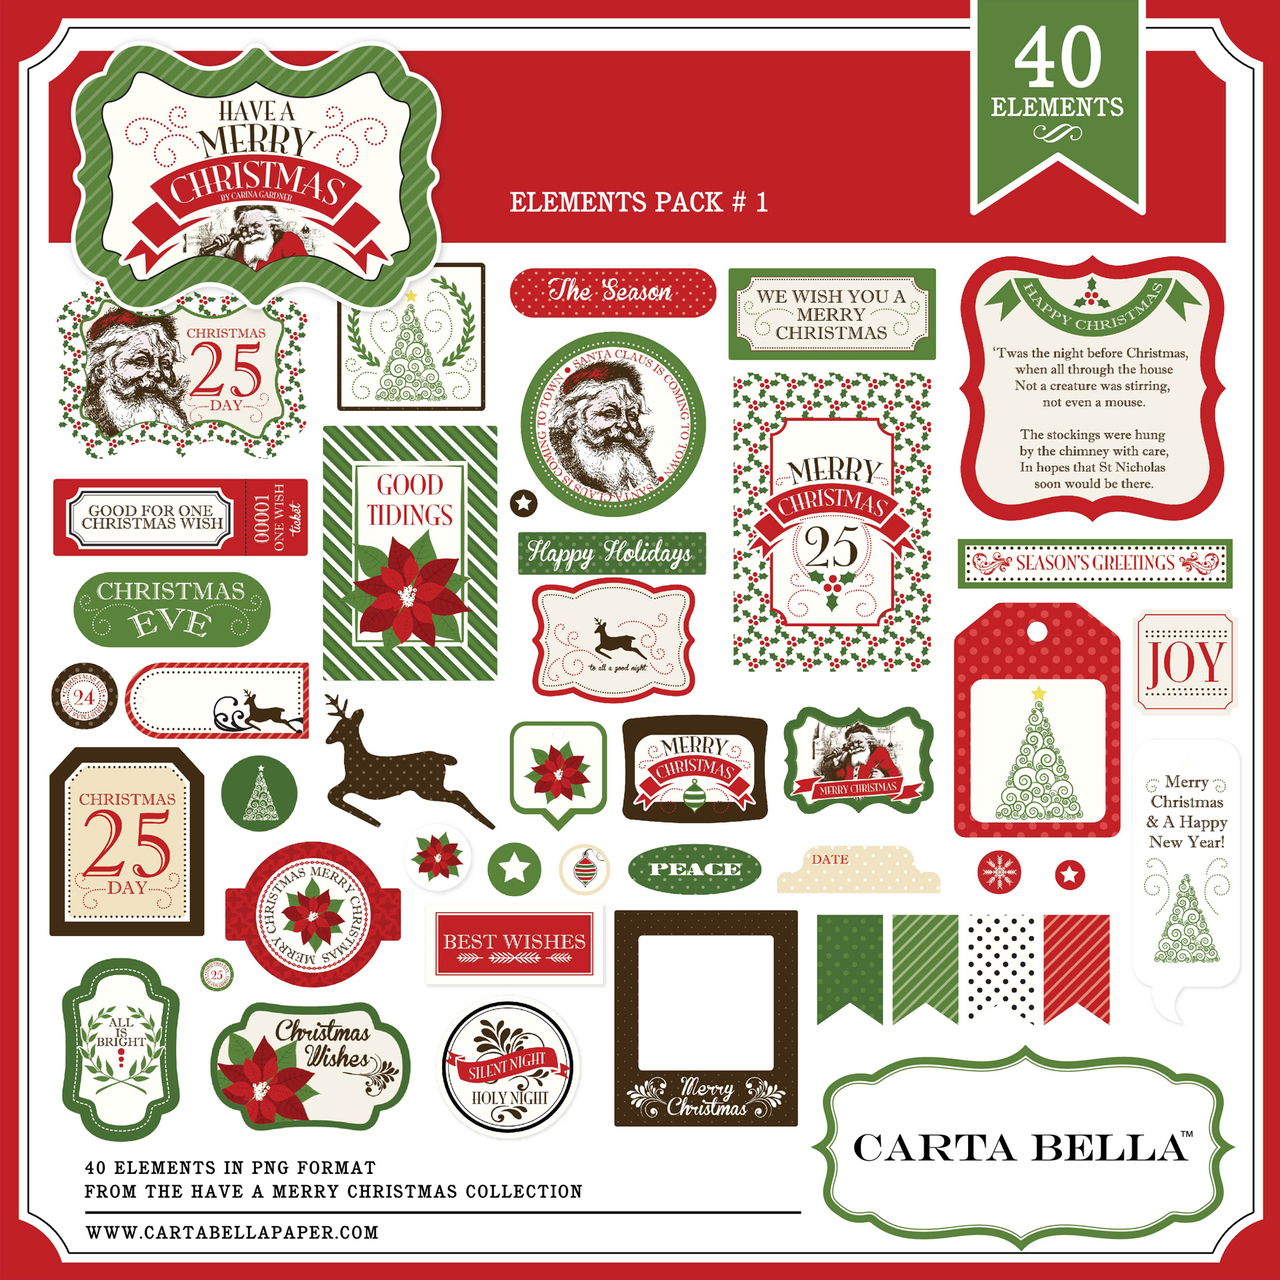 Carta Bella - A Wonderful Christmas Collection - Collection Kit